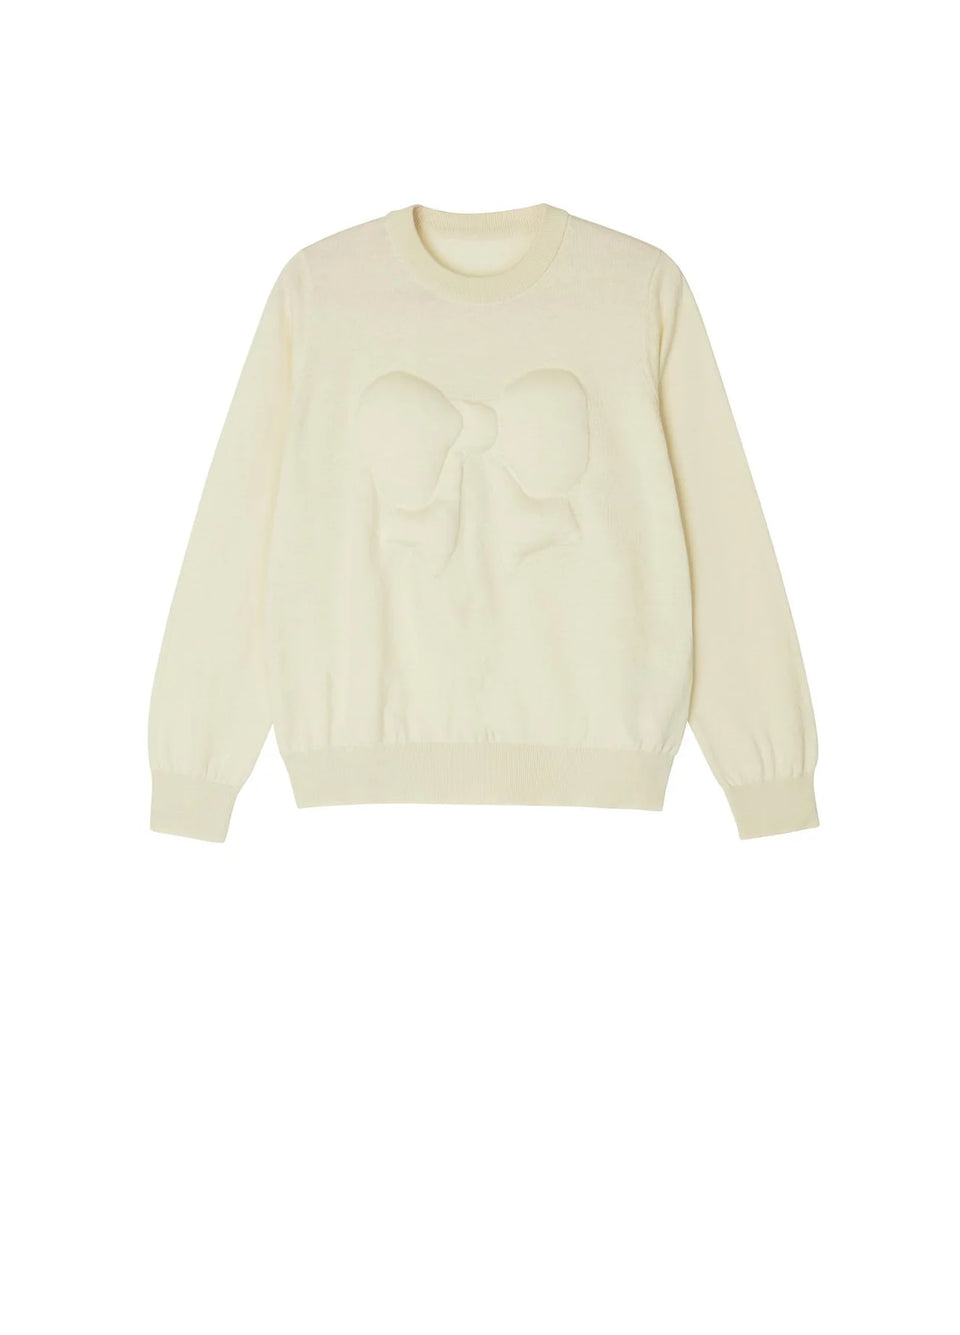 JNBY Cream Long Sleeve Knit Sweater with Puffy Bow